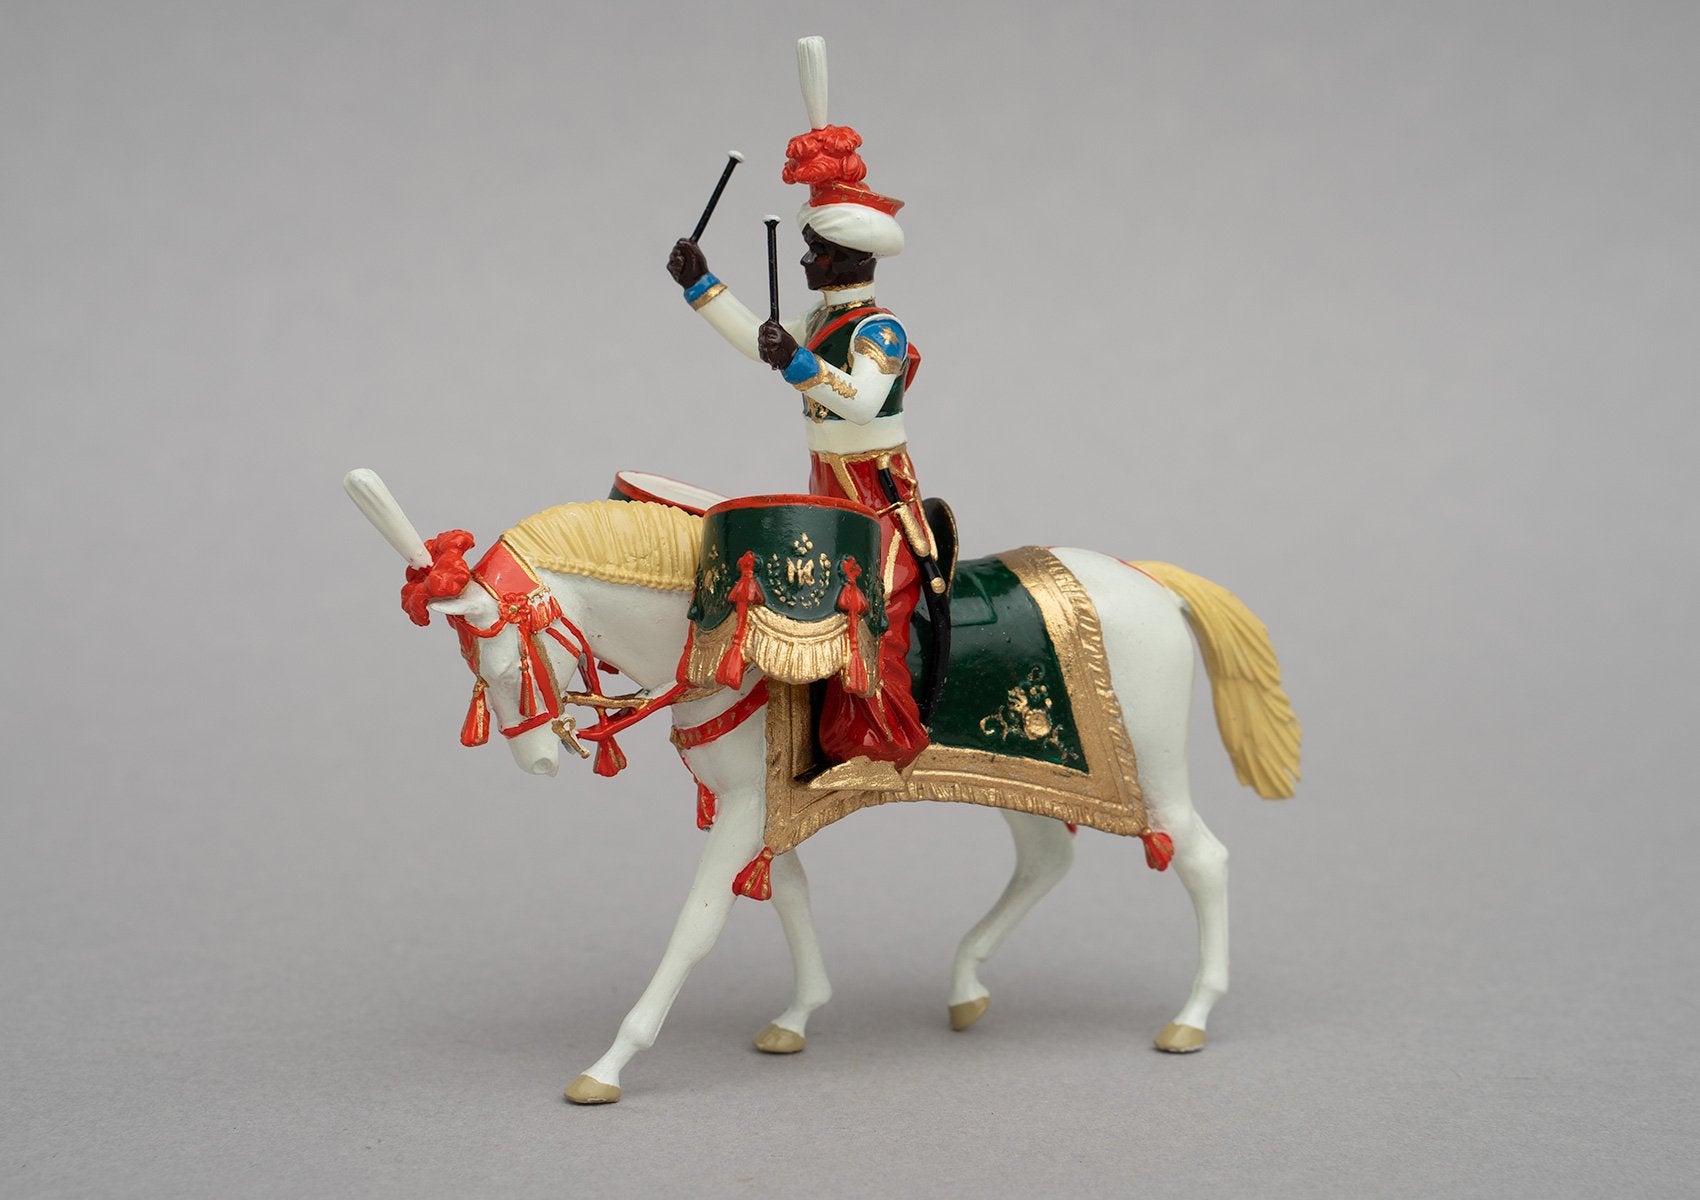 Set 120 Mameluke Drum Horse | French Cavalry | Napoleonic Wars | Drummer of Marmeluke cavalry. Uniform is of Syrian and Turkish Mameluke pattern; turban, sleeved chemise, arab sash, charoual-style trousers, and Mameluke sabre. Single mounted drummer on palomino | Waterloo | © Imperial Productions | Sculpt by David Cowe